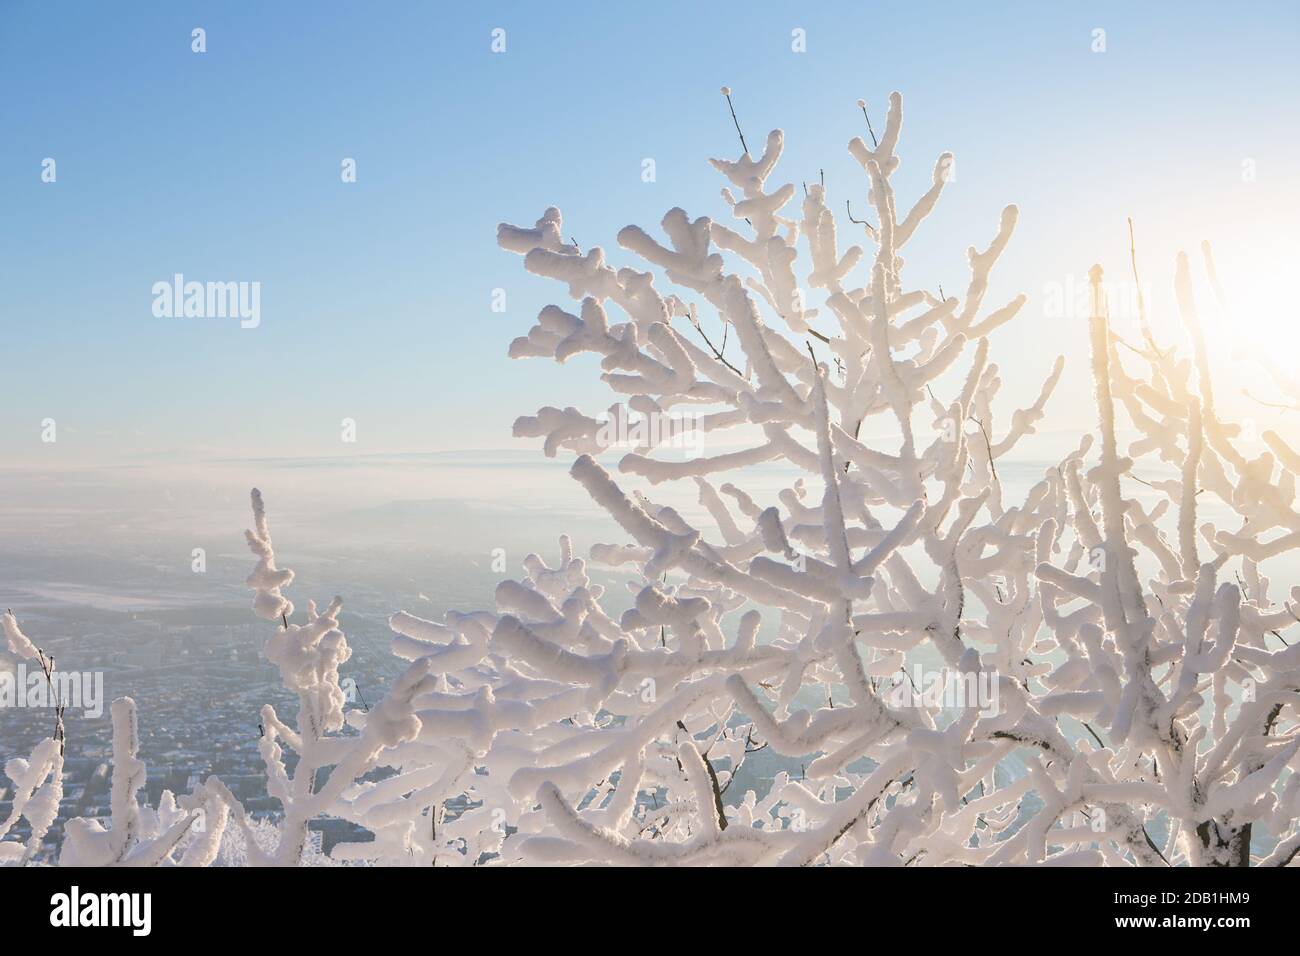 Close-up of frosty trees in winter mountains Stock Photo